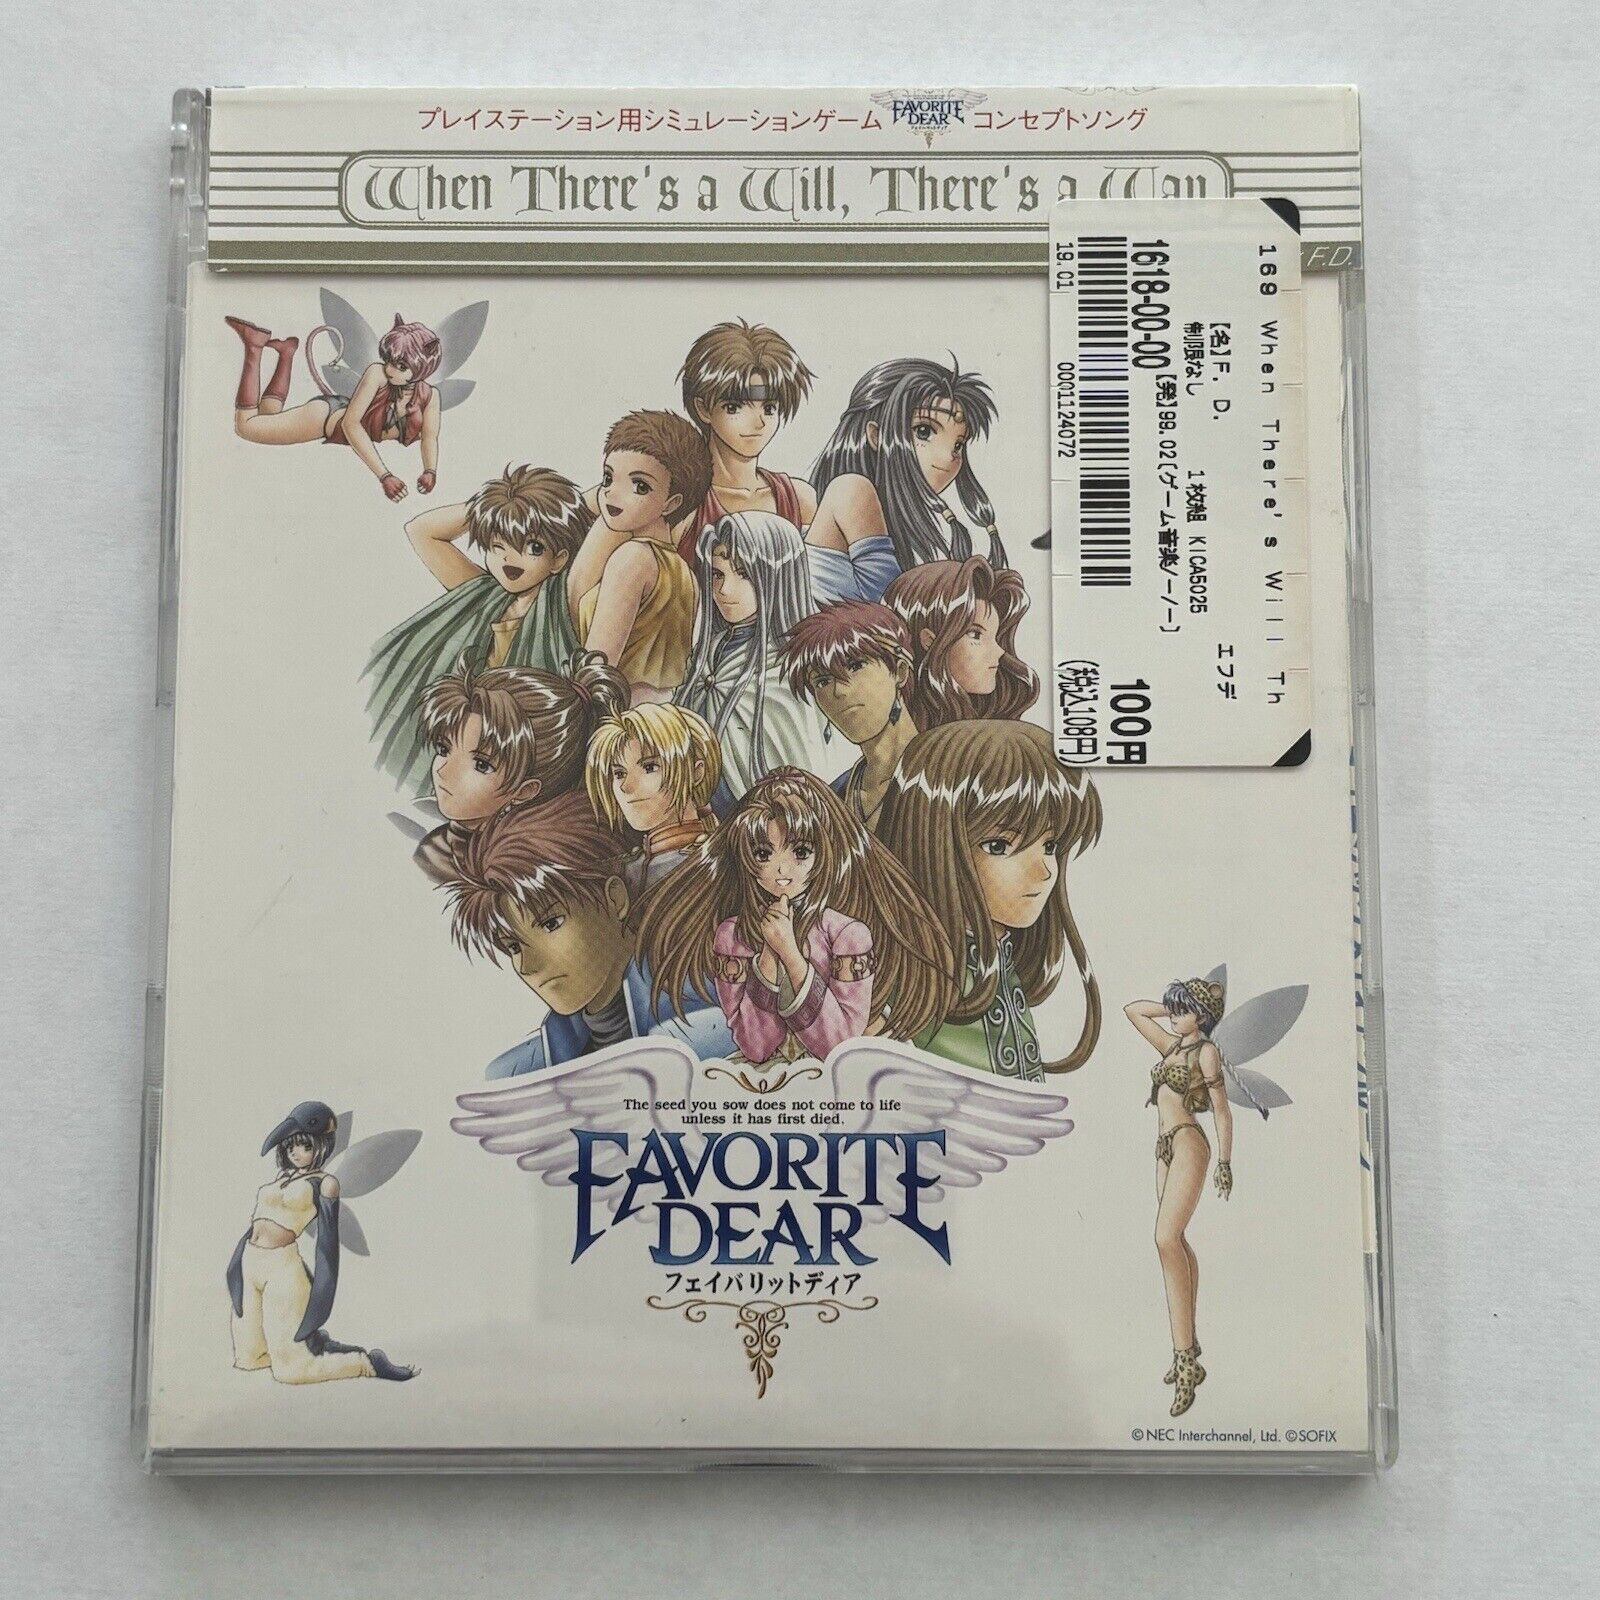 Favorite Dear - When There’s A Will There’s A Way CD Japan Anime Import 2001